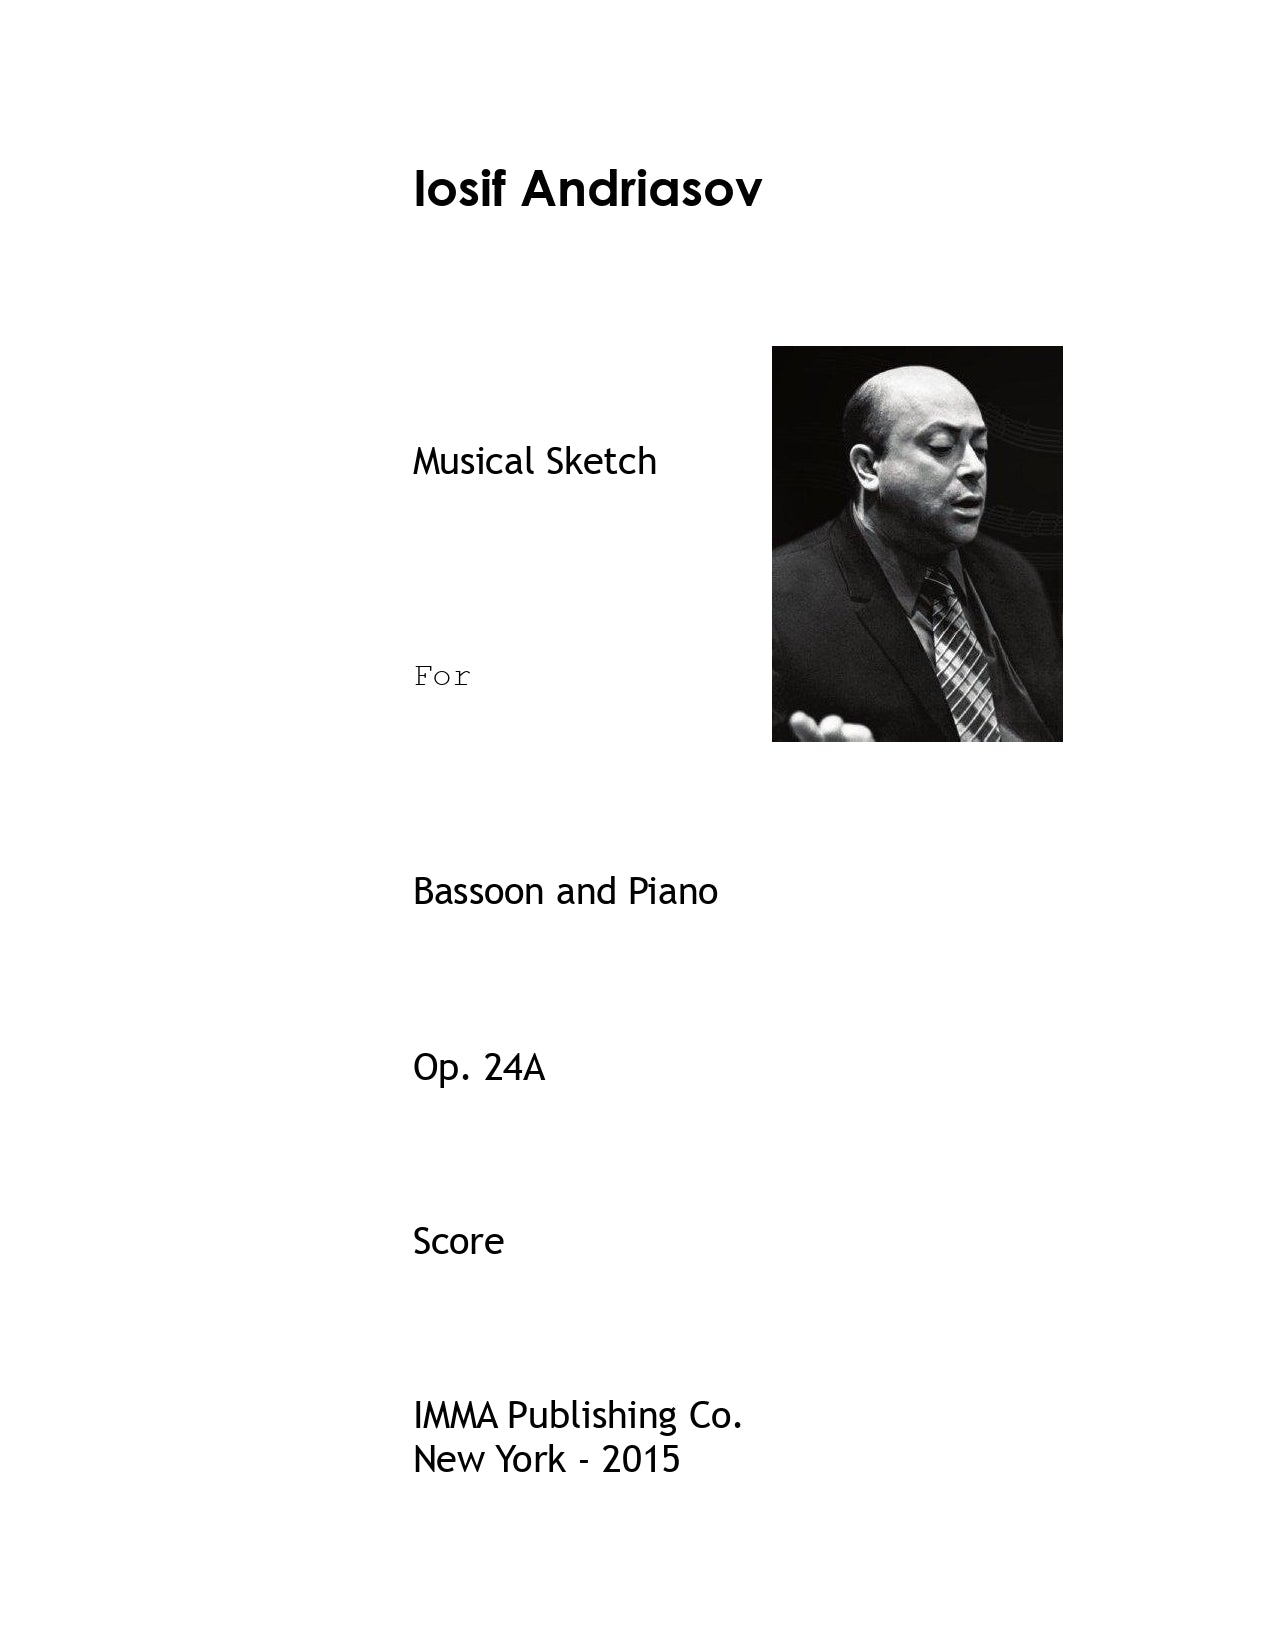 045. Iosif Andriasov: Musical Sketch, Op. 24A for Bassoon and Piano.